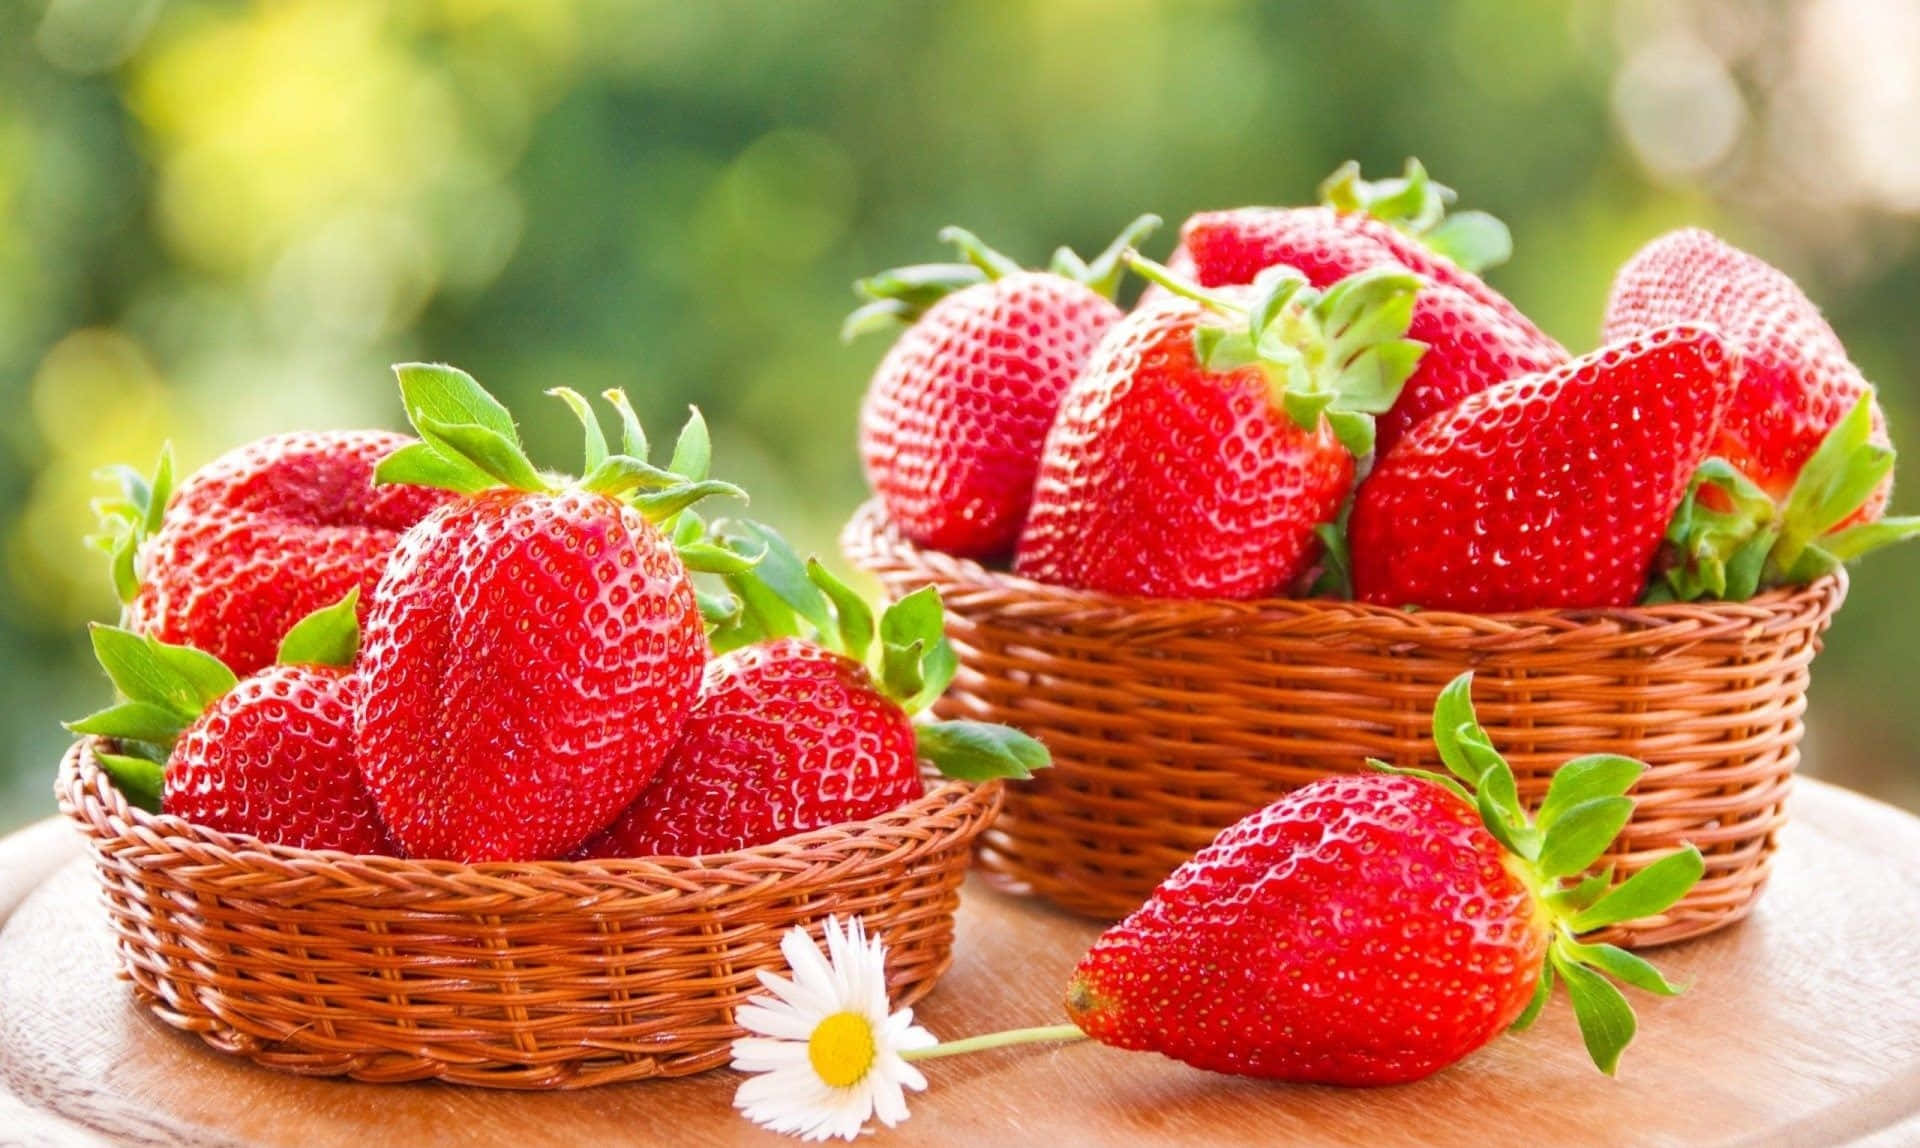 "Freshen up your day with a juicy, ripe strawberry!" Wallpaper